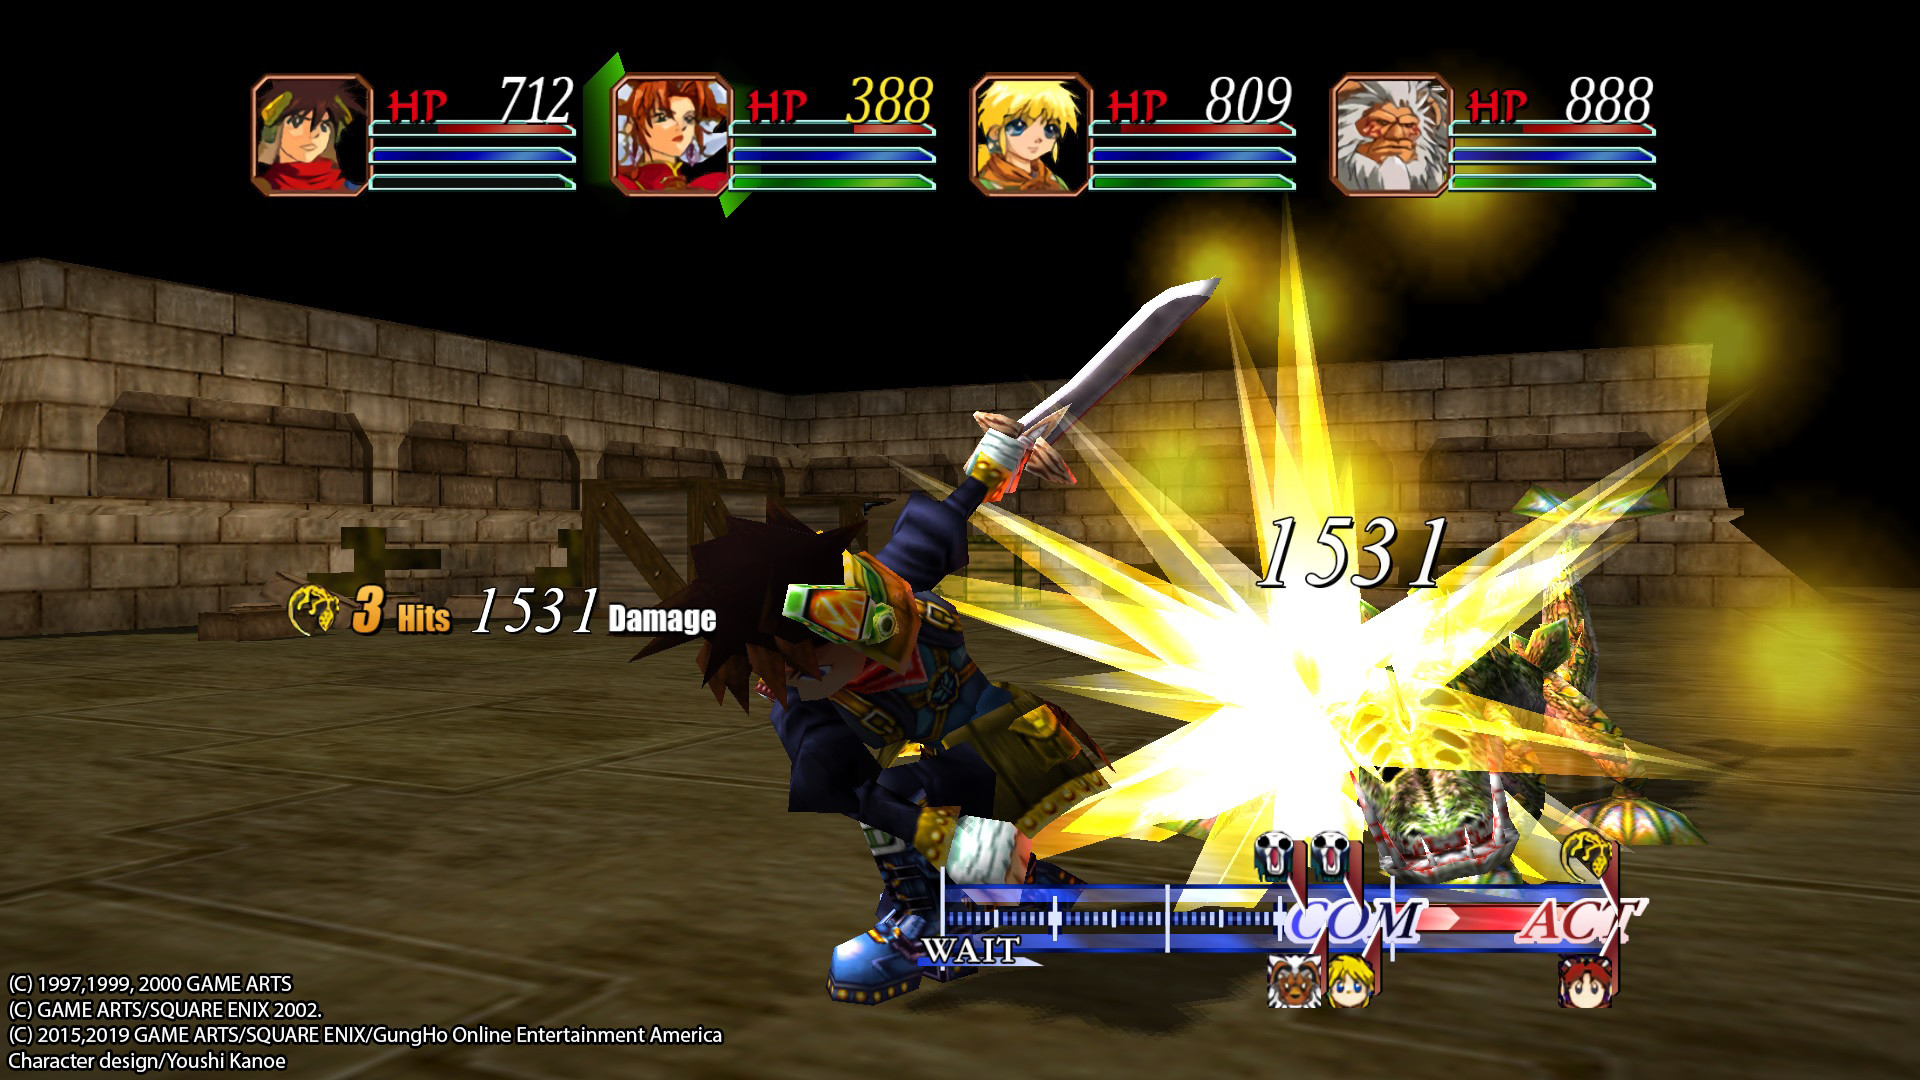 Grandia 2 hd remaster pc download 18 wheels of steel for windows 7 free download